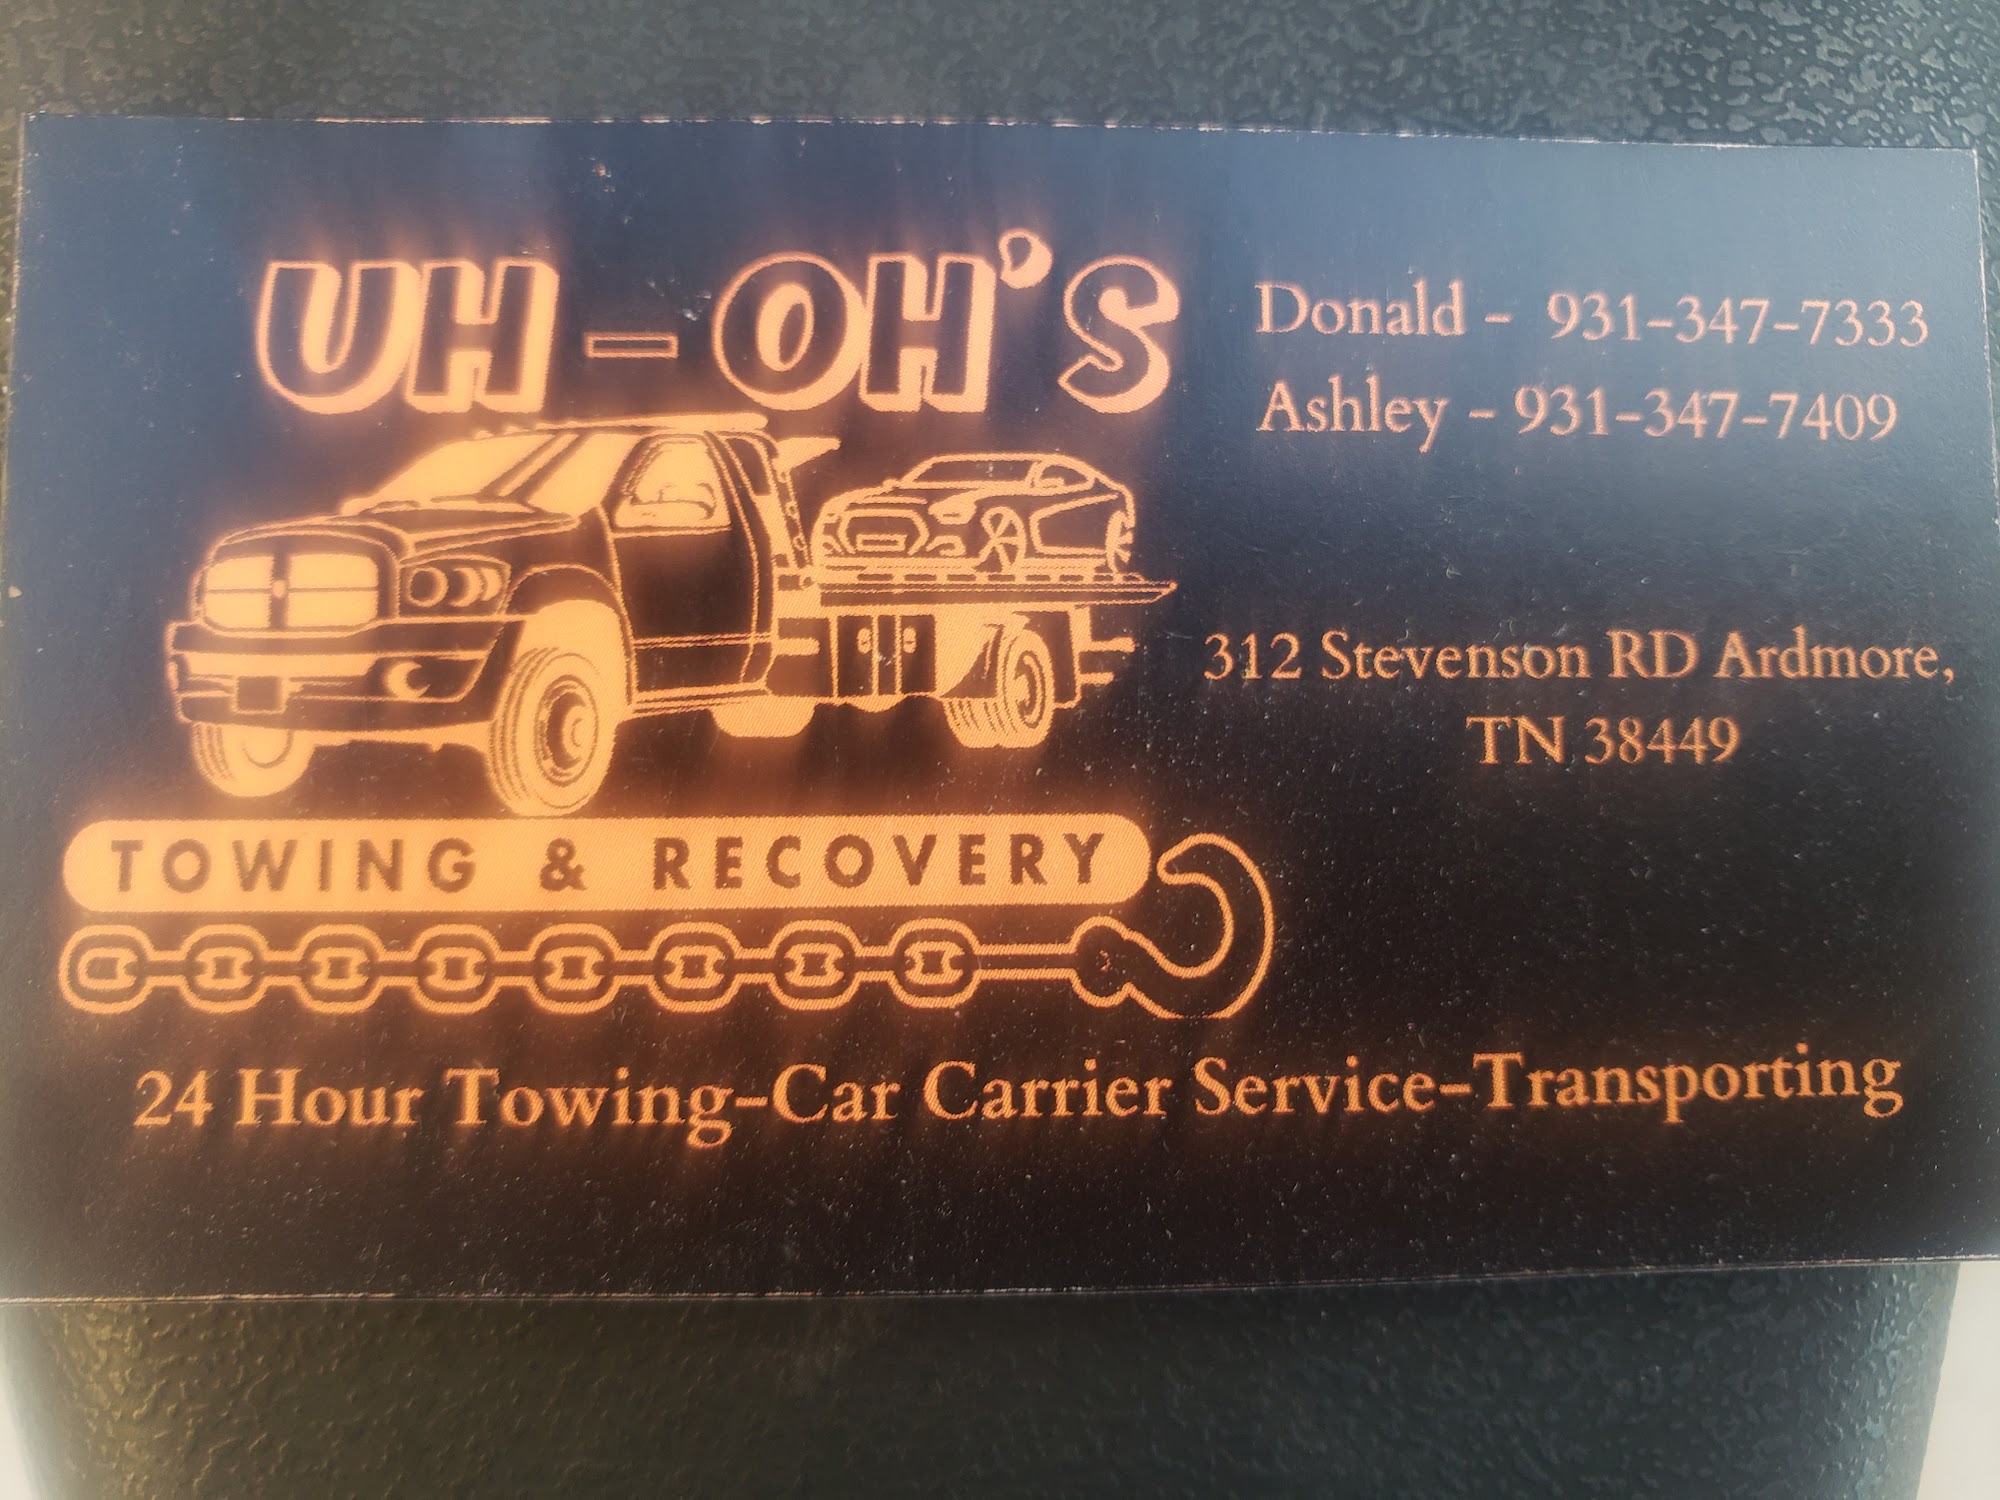 Uh-Oh's Towing and Recovery